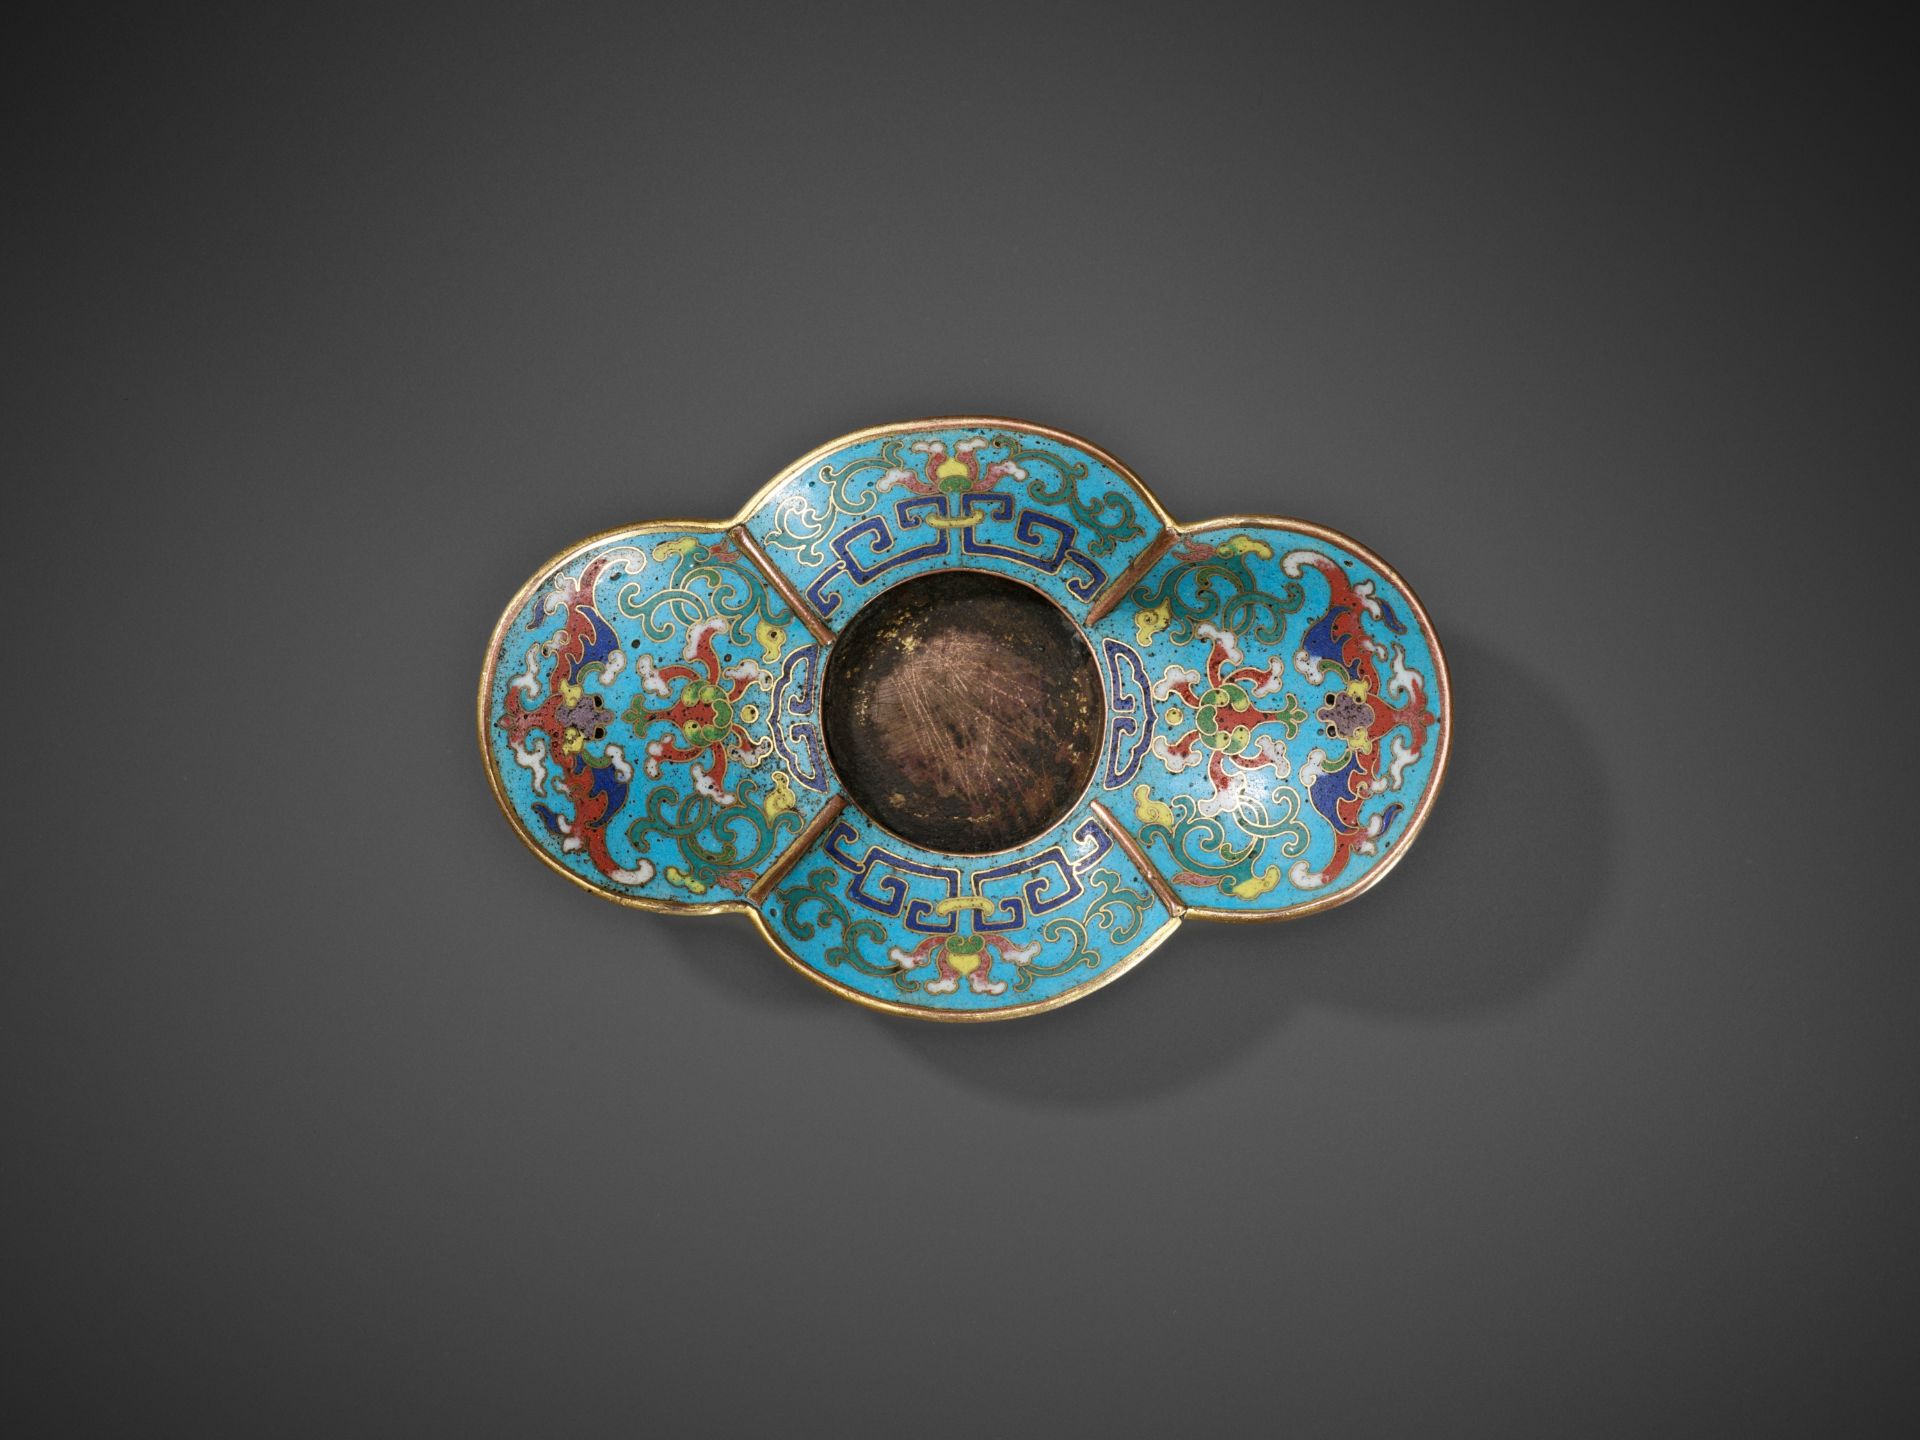 A GILT-COPPER CLOISONNE QUADRILOBED CUP STAND, 18TH CENTURY - Image 9 of 9